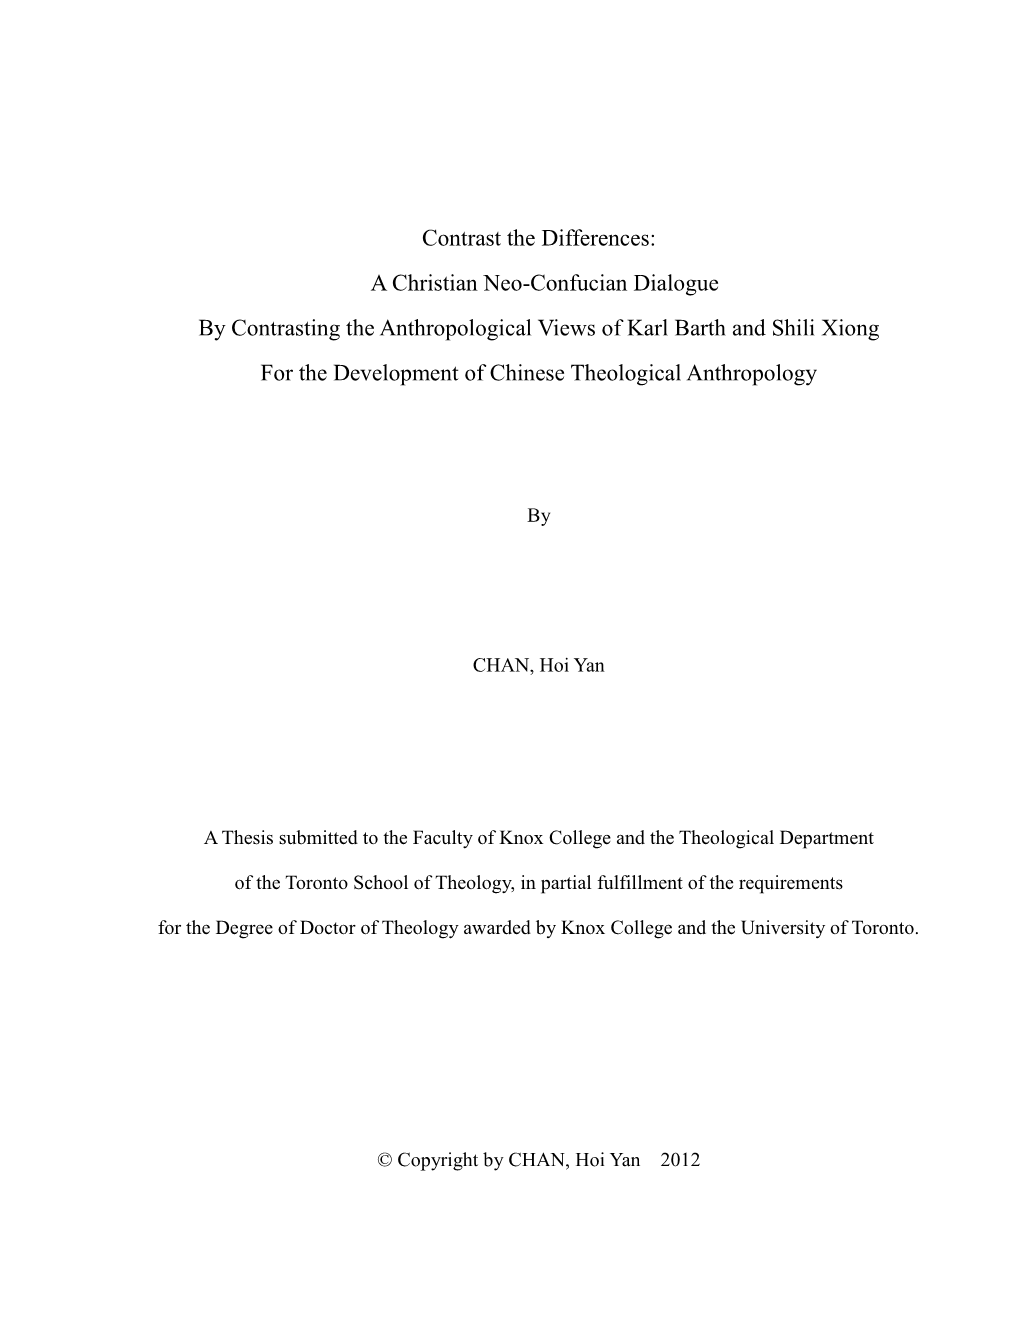 A Christian Neo-Confucian Dialogue by Contrasting the Anthropological Views of Karl Barth and Shili Xiong for the Development of Chinese Theological Anthropology